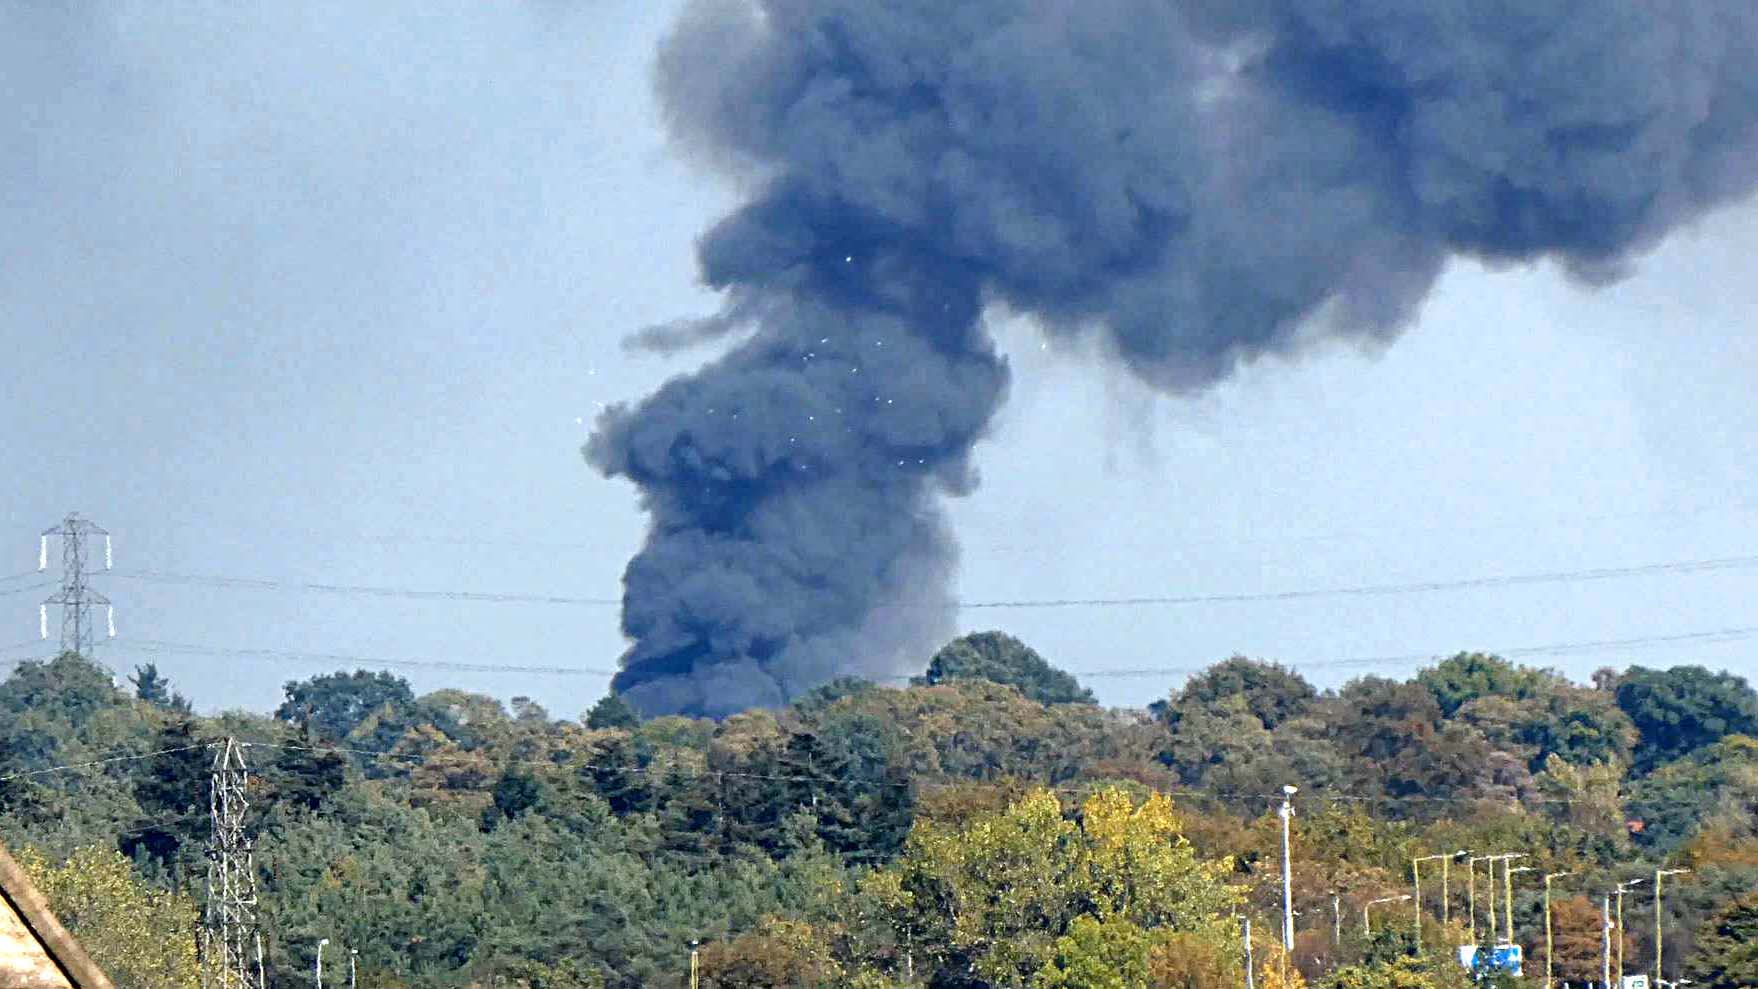 Scrapyard fire in Aldenham could be seen for miles as Thick Black smoke bellowed into the sky.